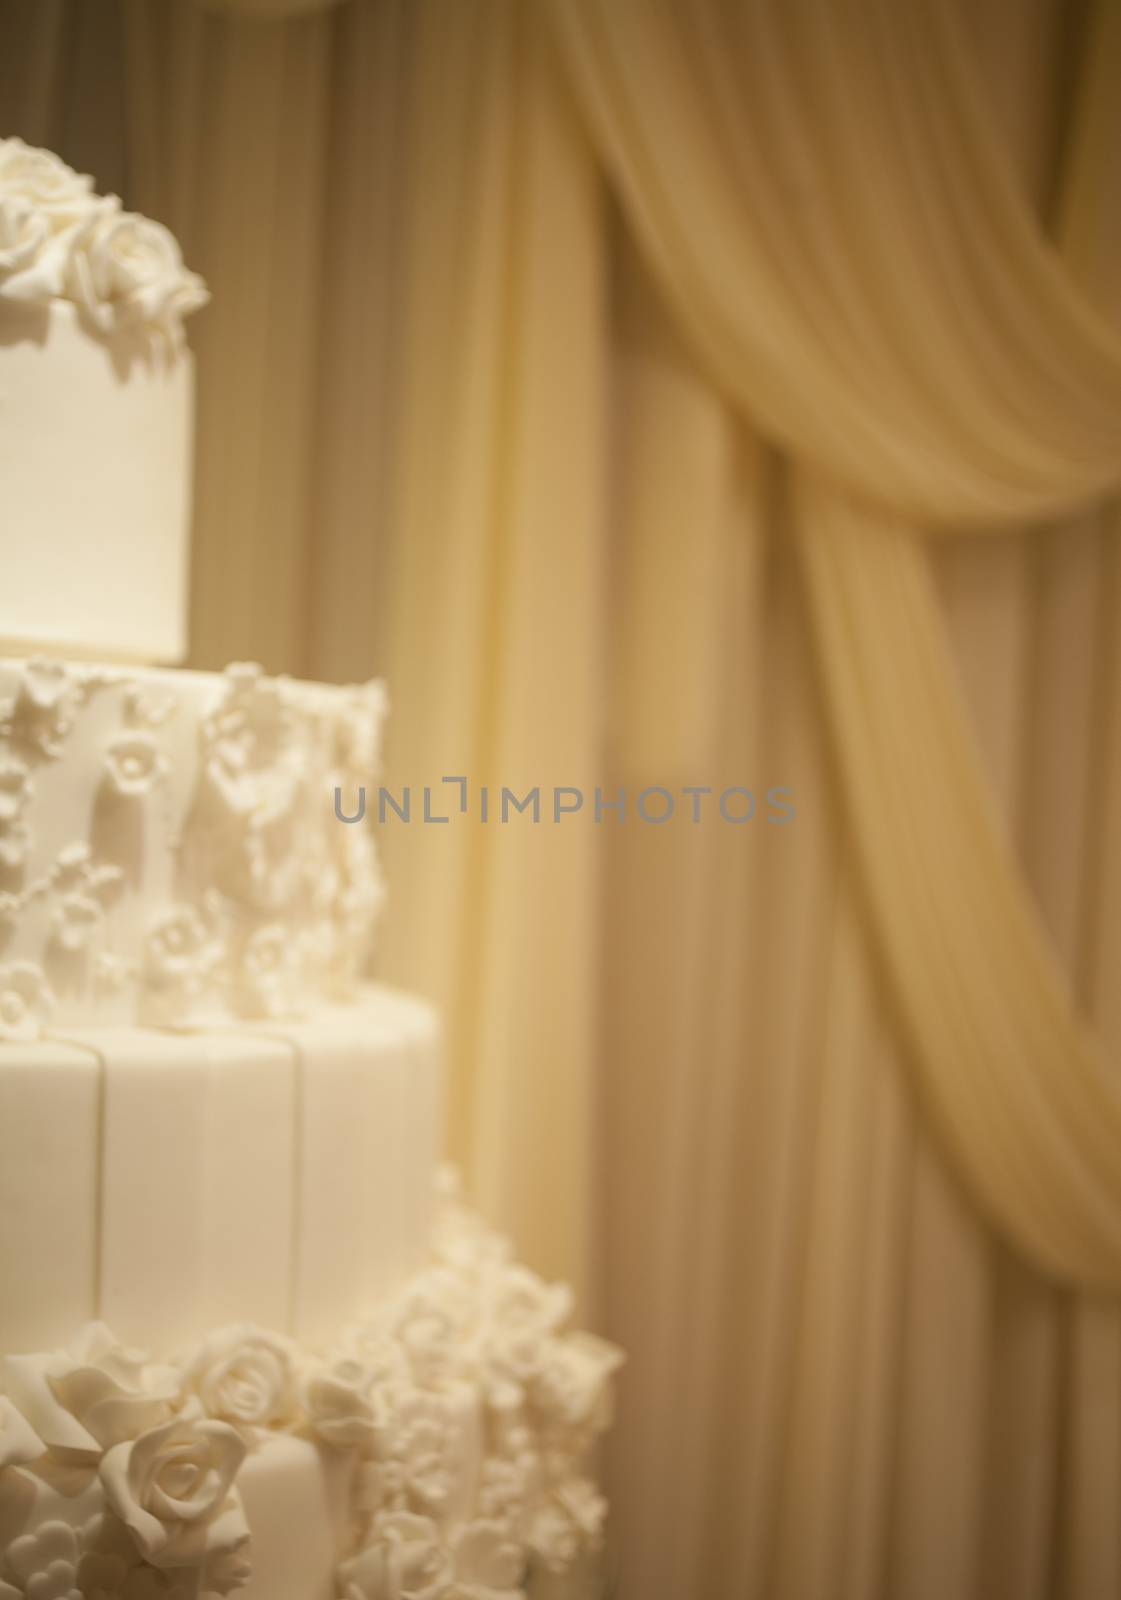 Wedding cake in banquet dinner reception party by edwardolive